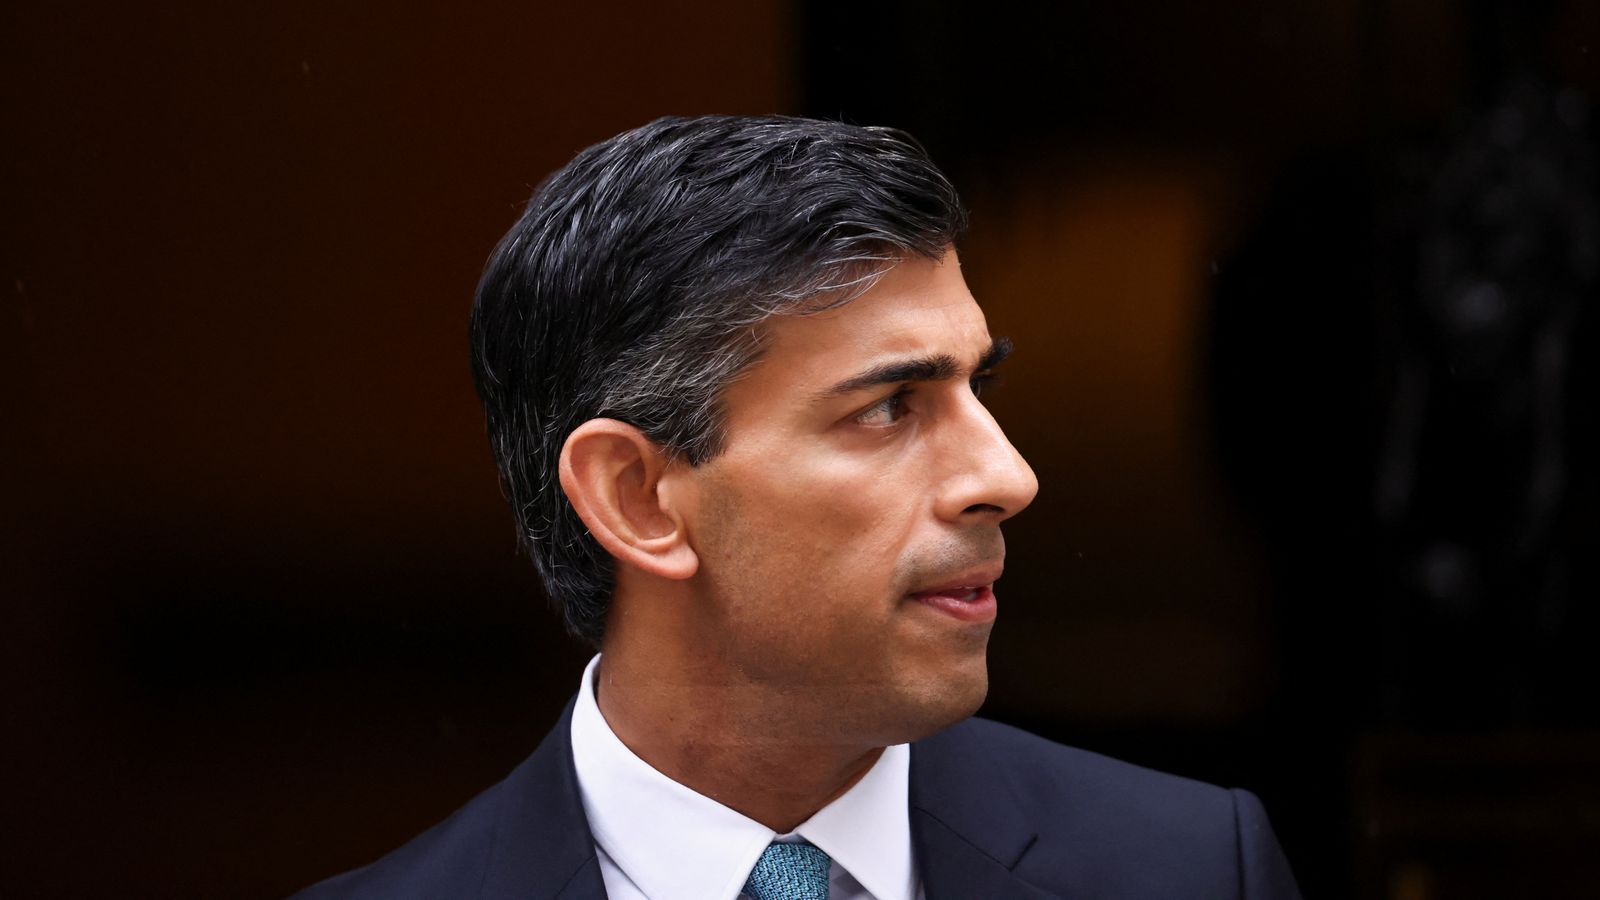 Rishi Sunak under pressure to protect pension triple lock - with a growing backlash over Braverman's return